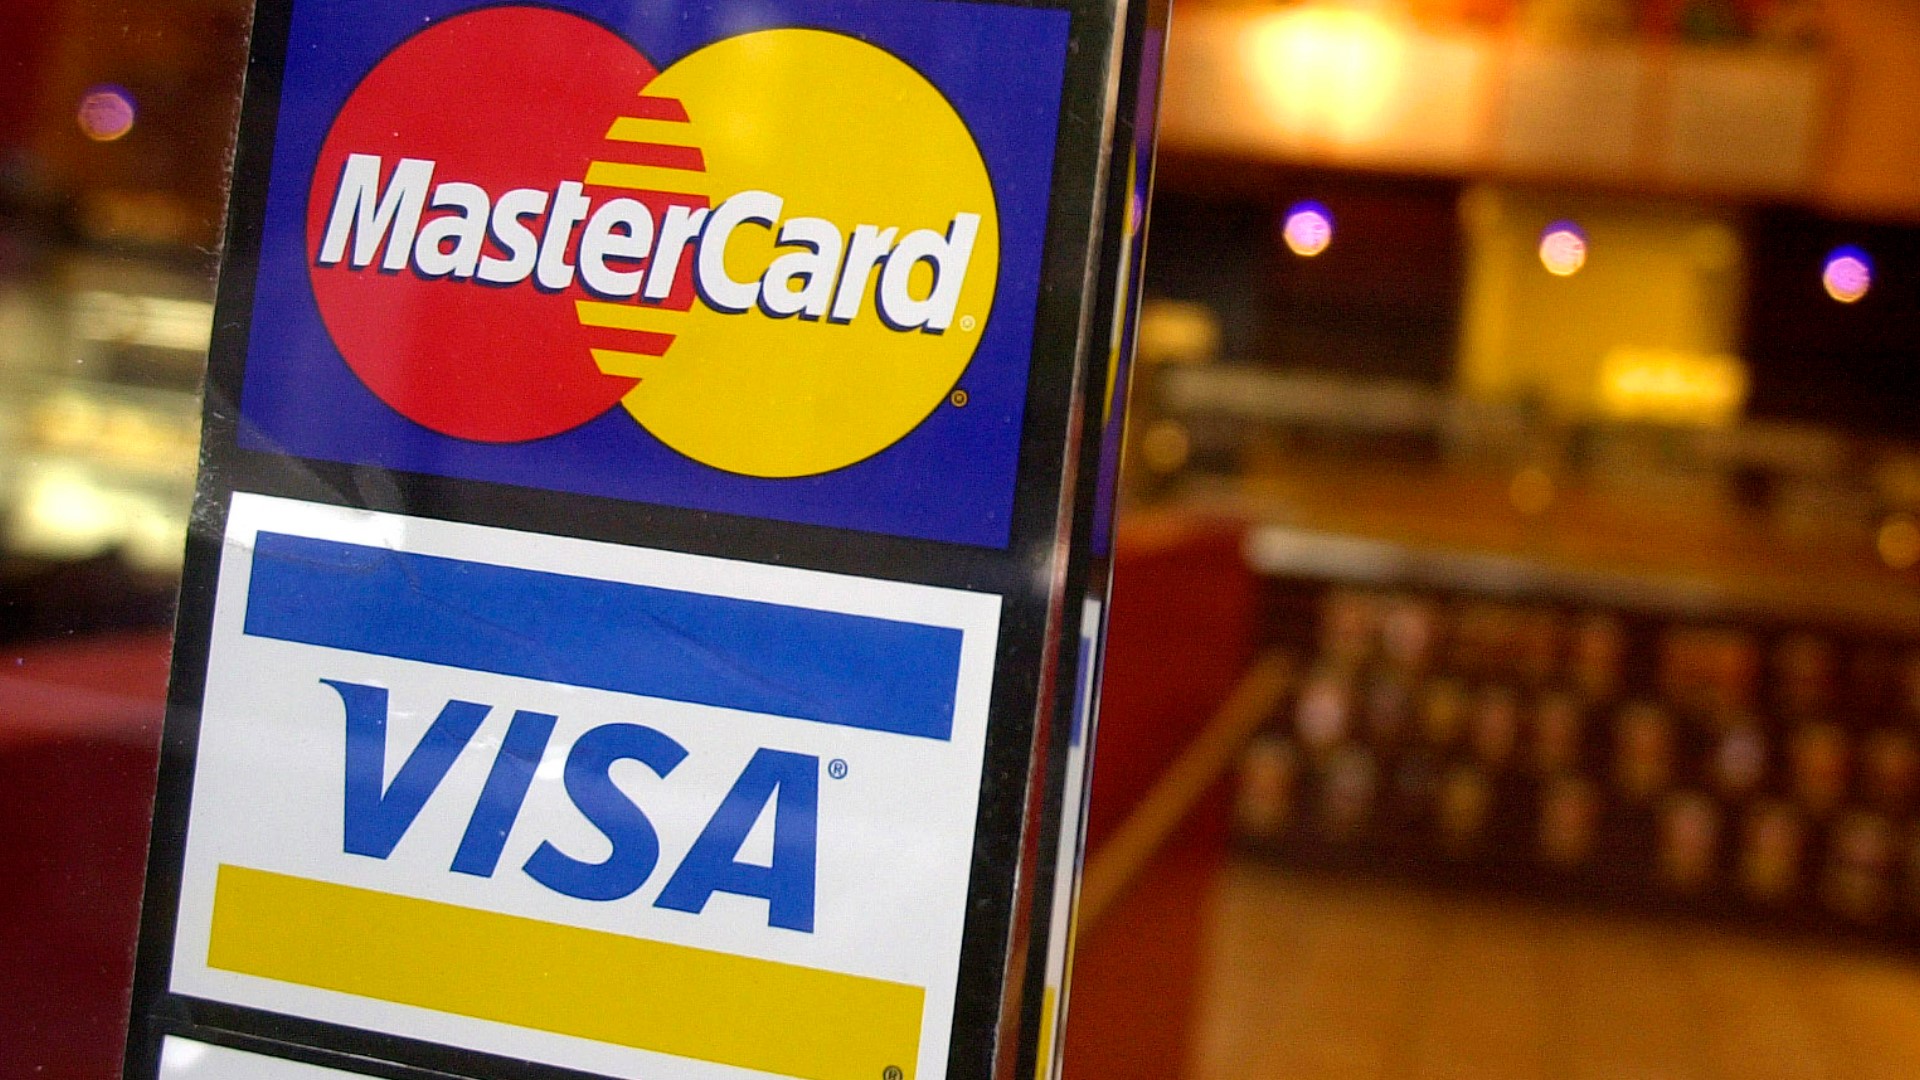 The settlement stems from a 2005 lawsuit which alleged that merchants paid excessive fees to accept Visa and Mastercard credit cards.